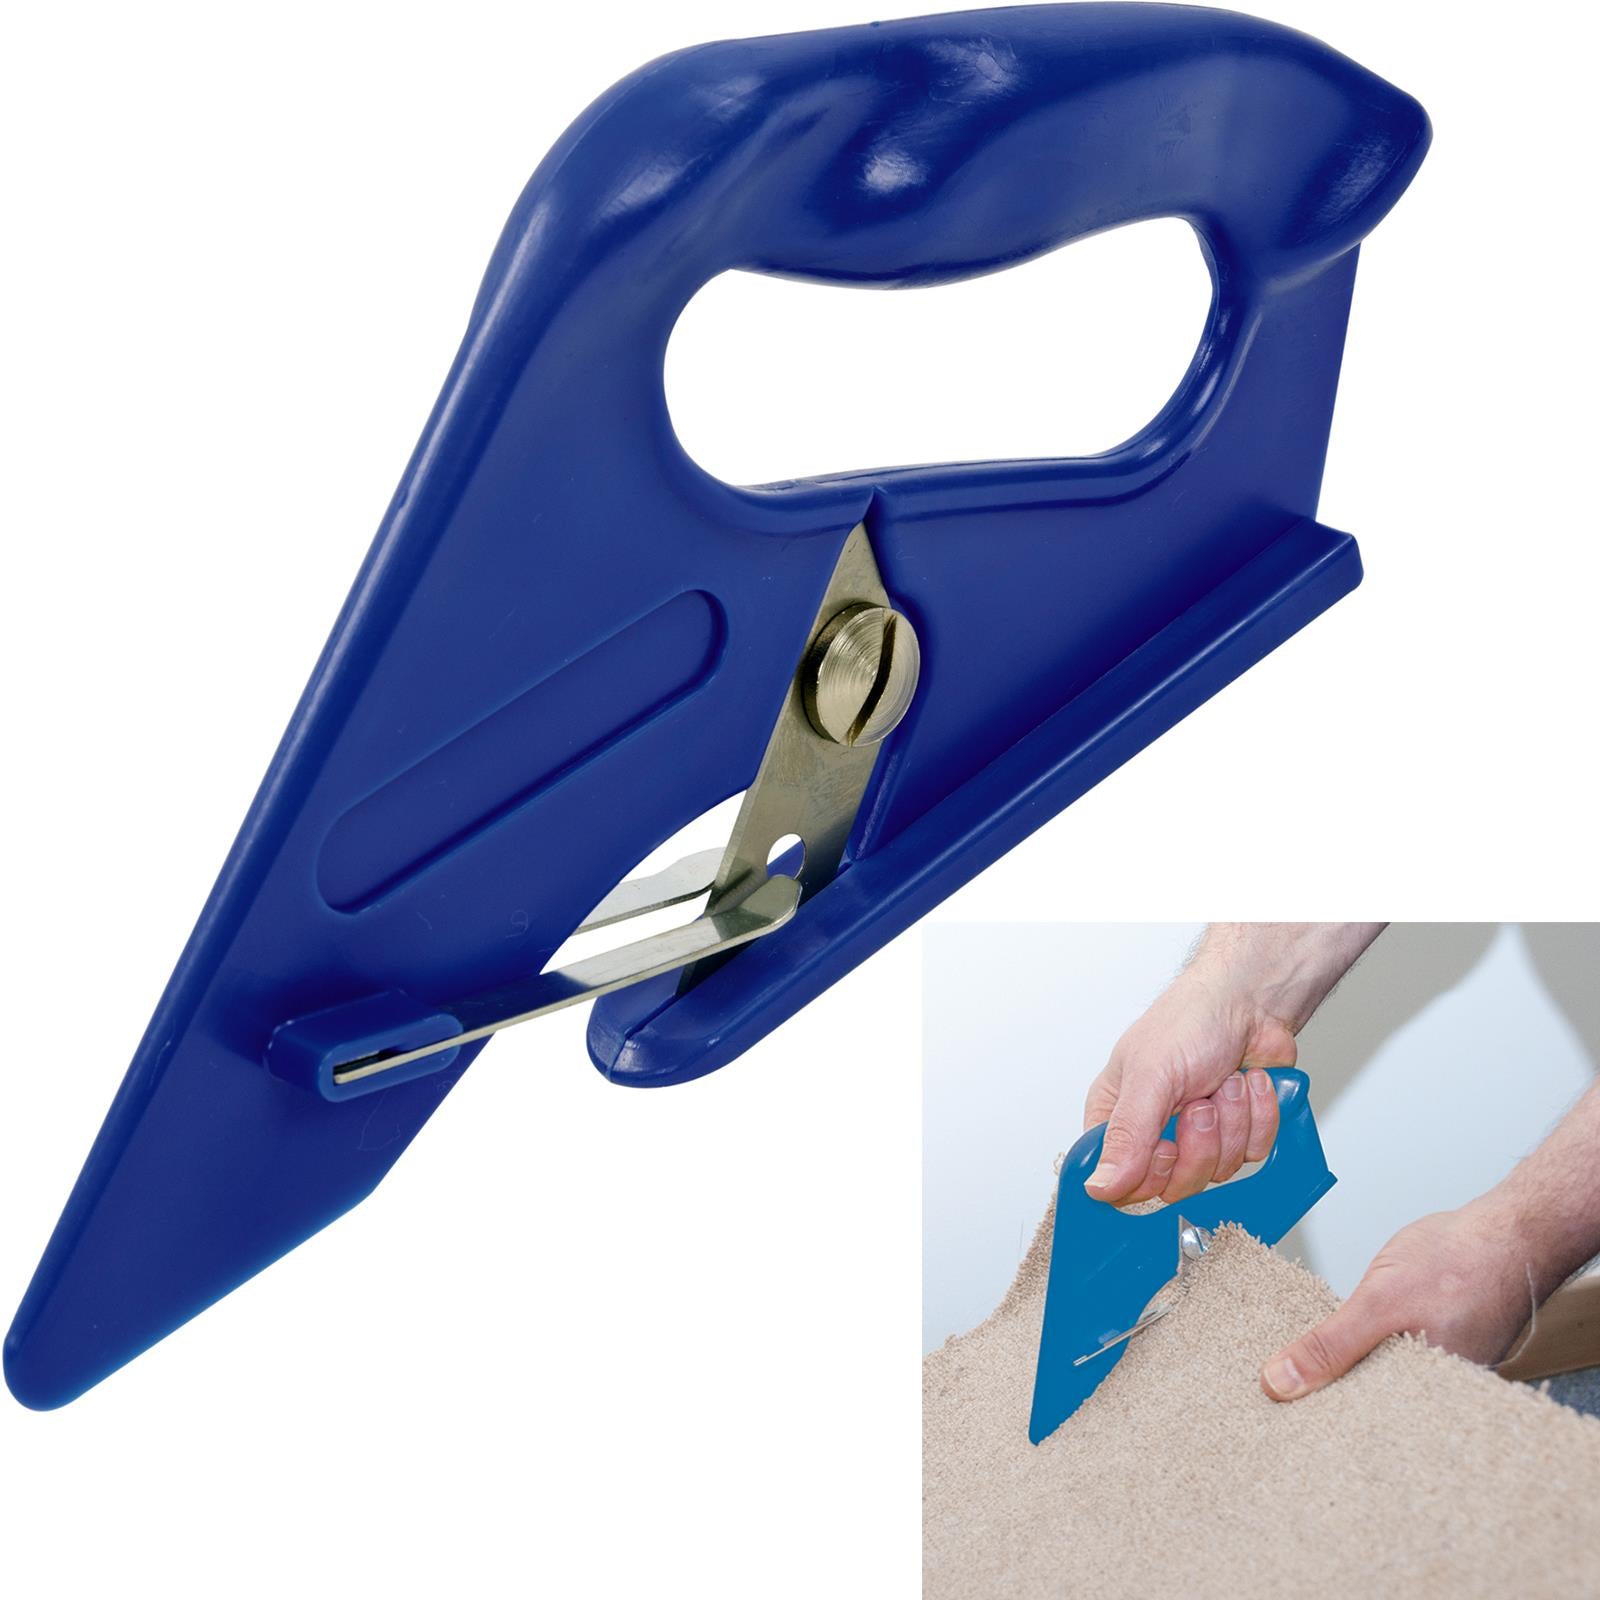 Heavy Duty SK5 Steel Hook Blade for Box Cutter Carpet Cutter Utility Knife  Hook Pointed Blades -Utility Knife Blades